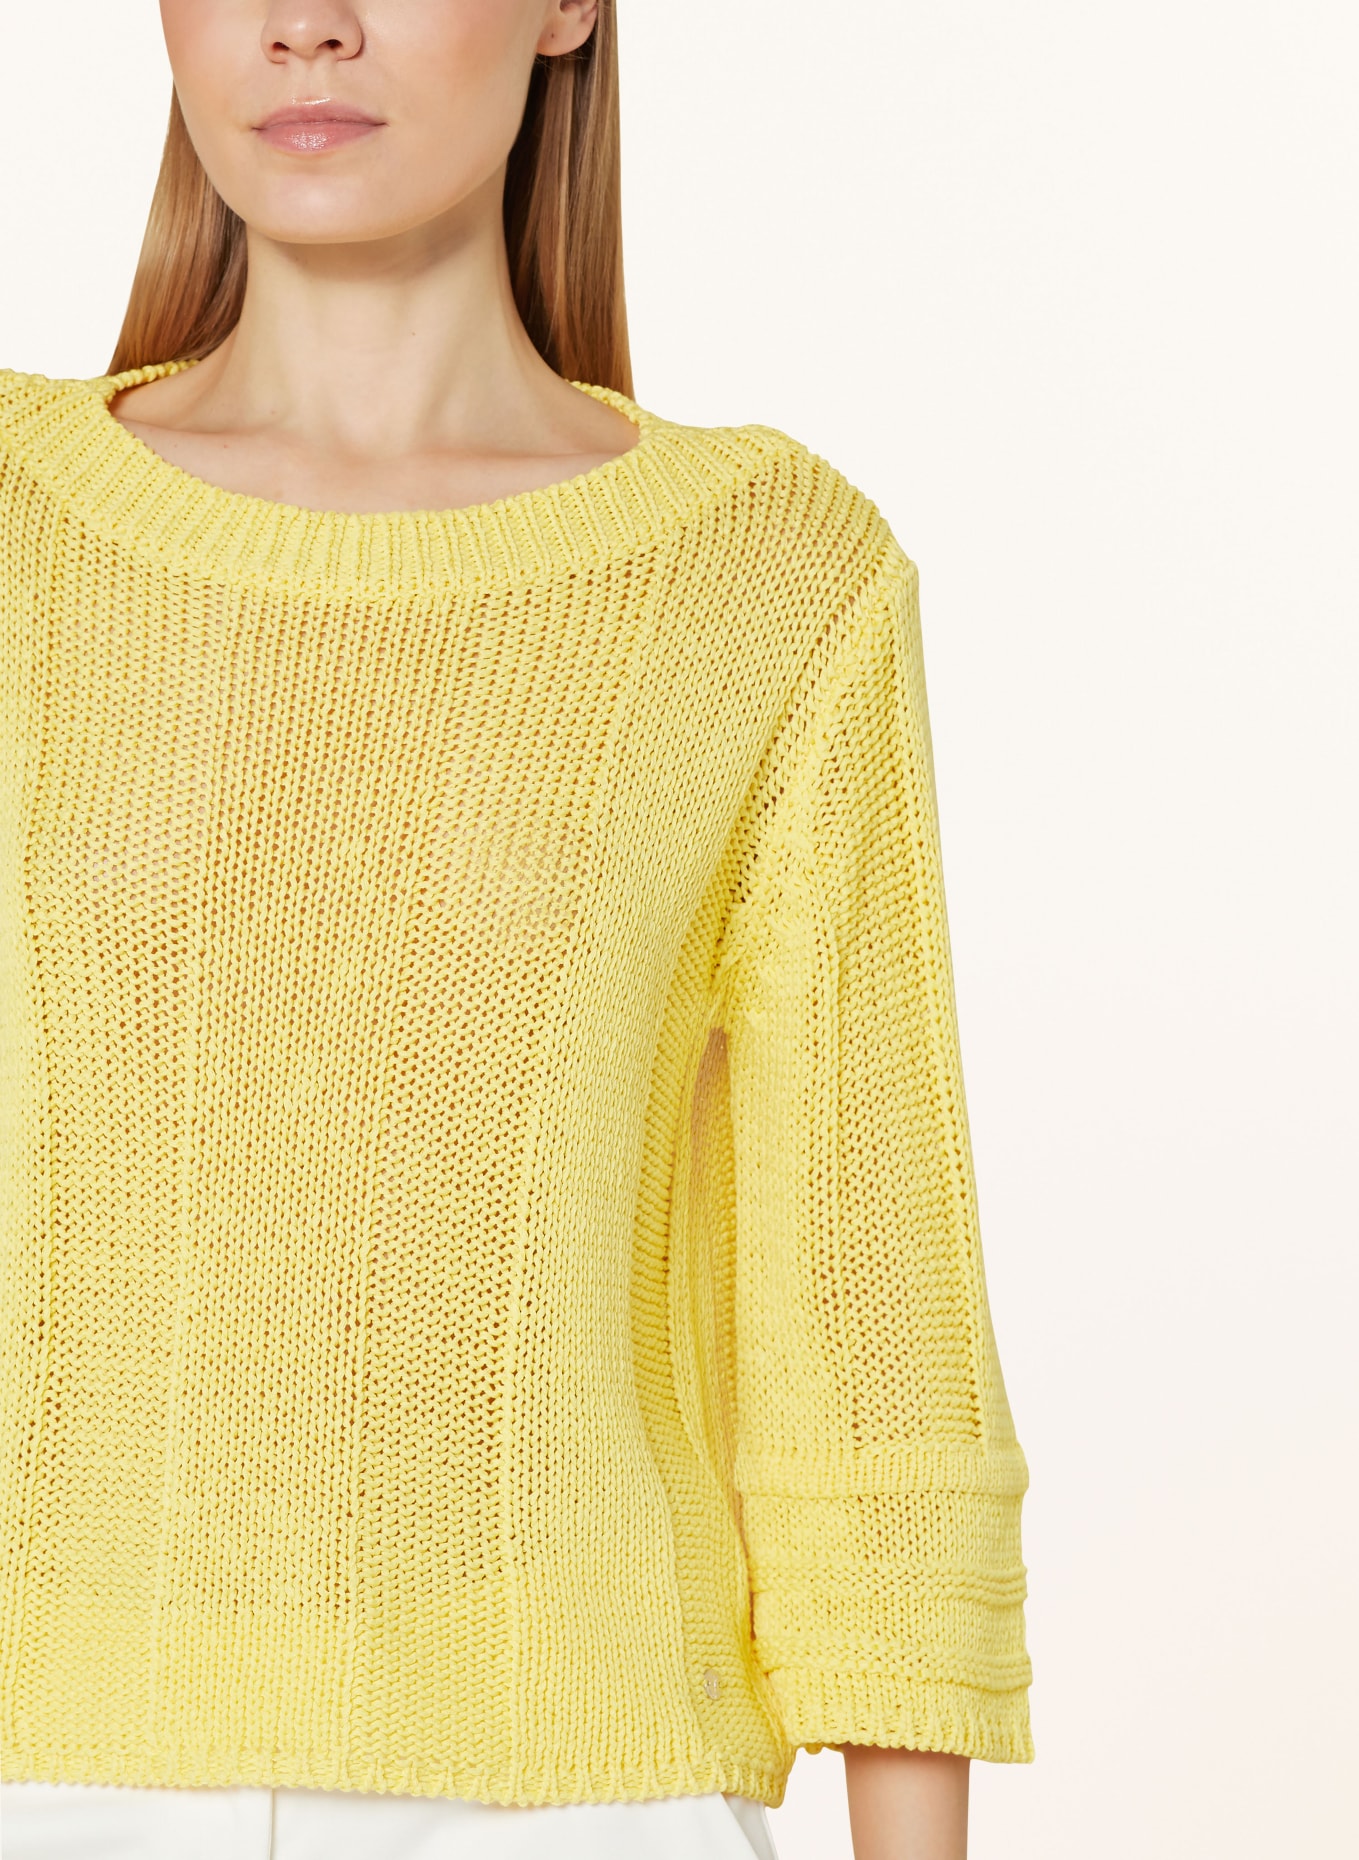 monari Sweater with 3/4 sleeves, Color: YELLOW (Image 4)